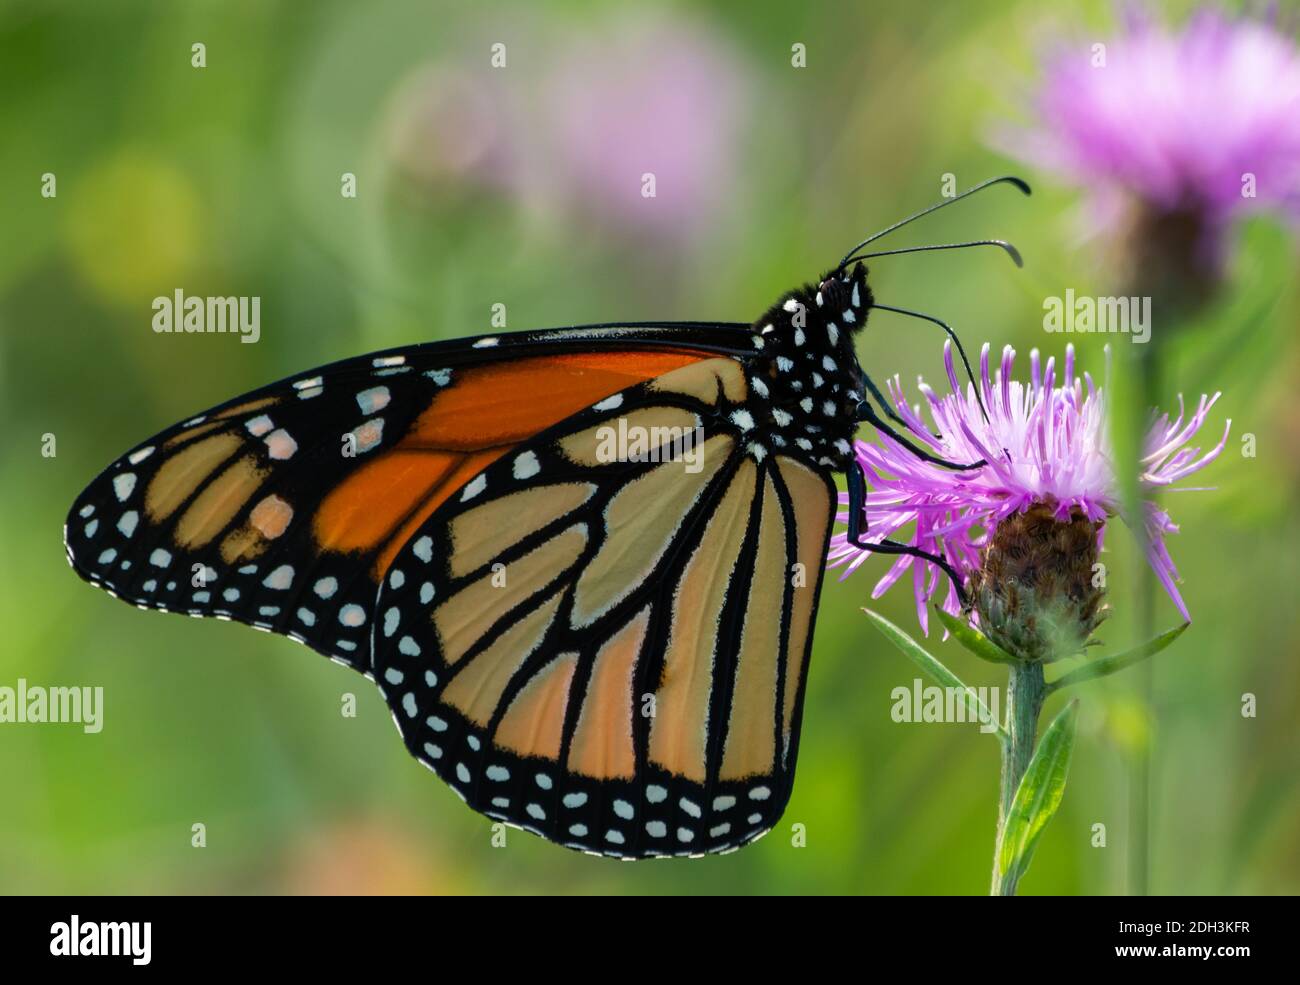 A beautiful monarch butterfly is resting on a purple thistle in the garden. Stock Photo